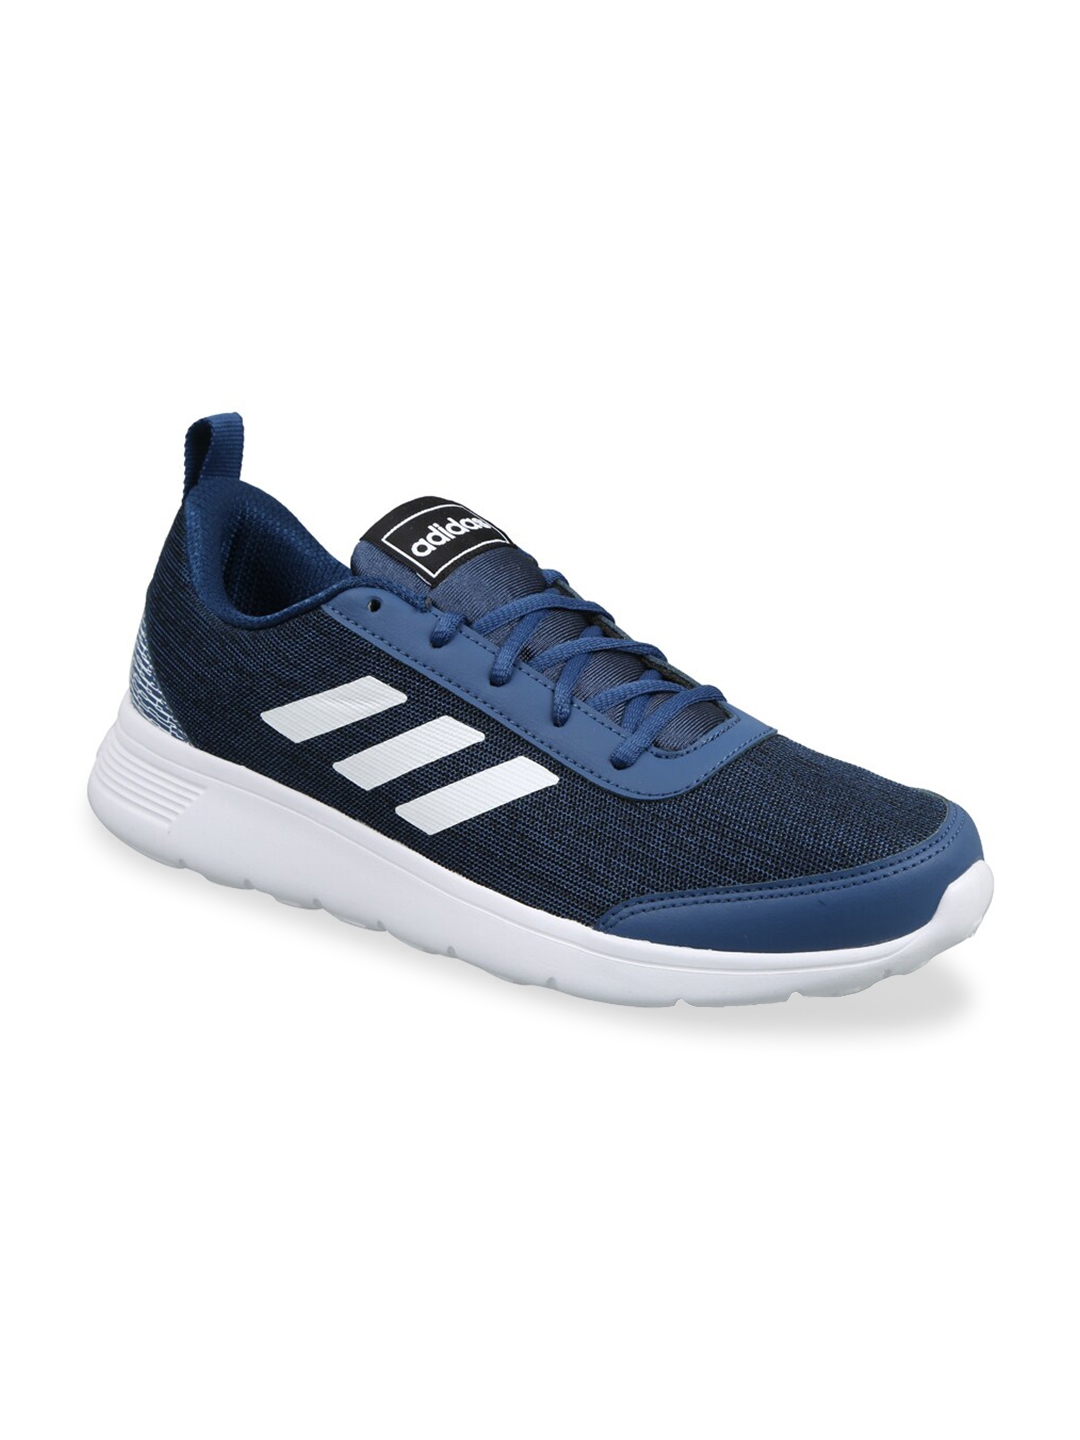 Buy ADIDAS Men Navy Blue Running Shoes Clinch X M - Sports Shoes for ...